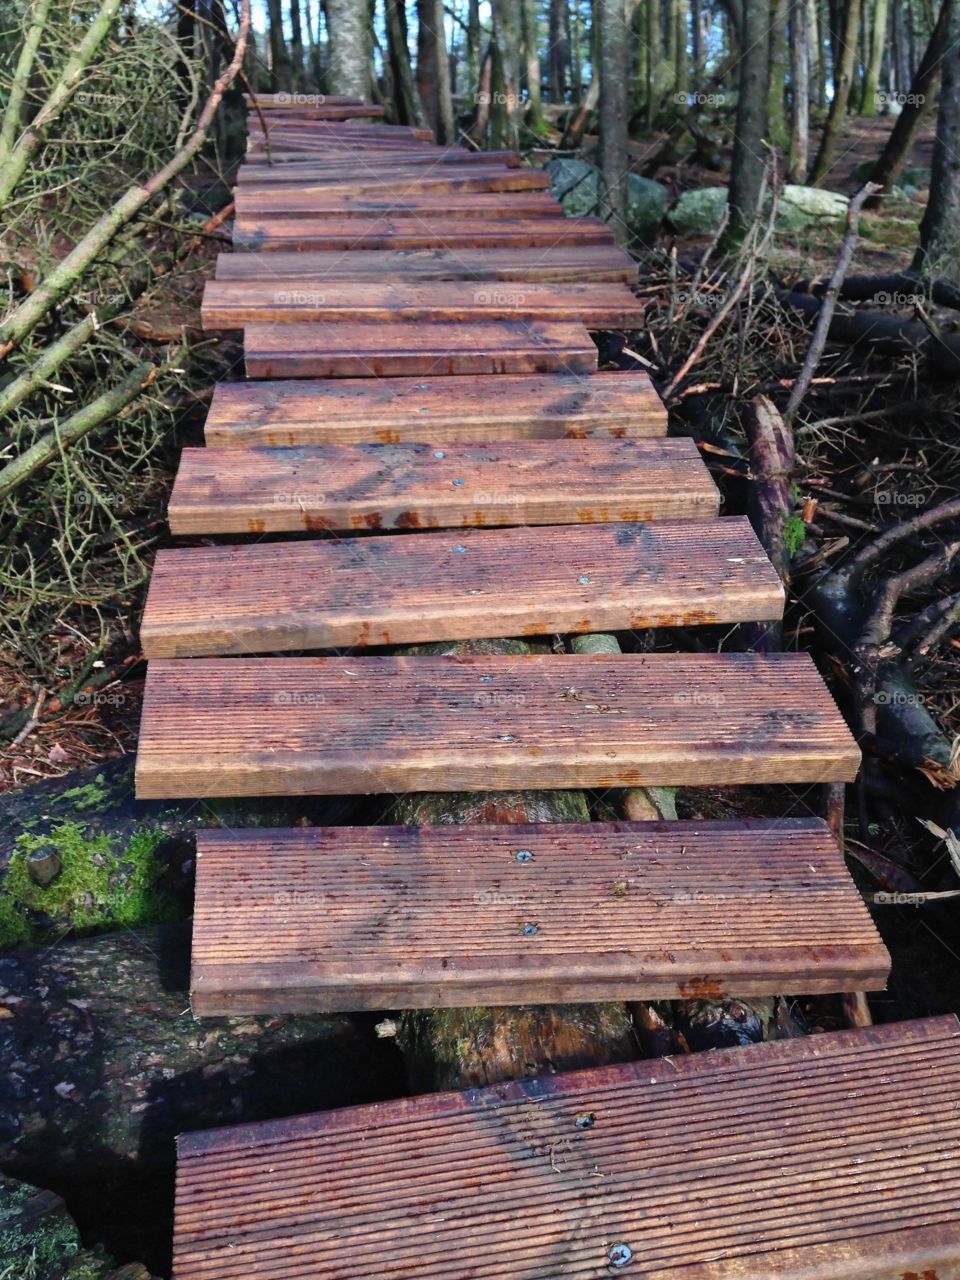 Mountain bike obstacle outdoor. Wooden ramp for mountain biking in the woods